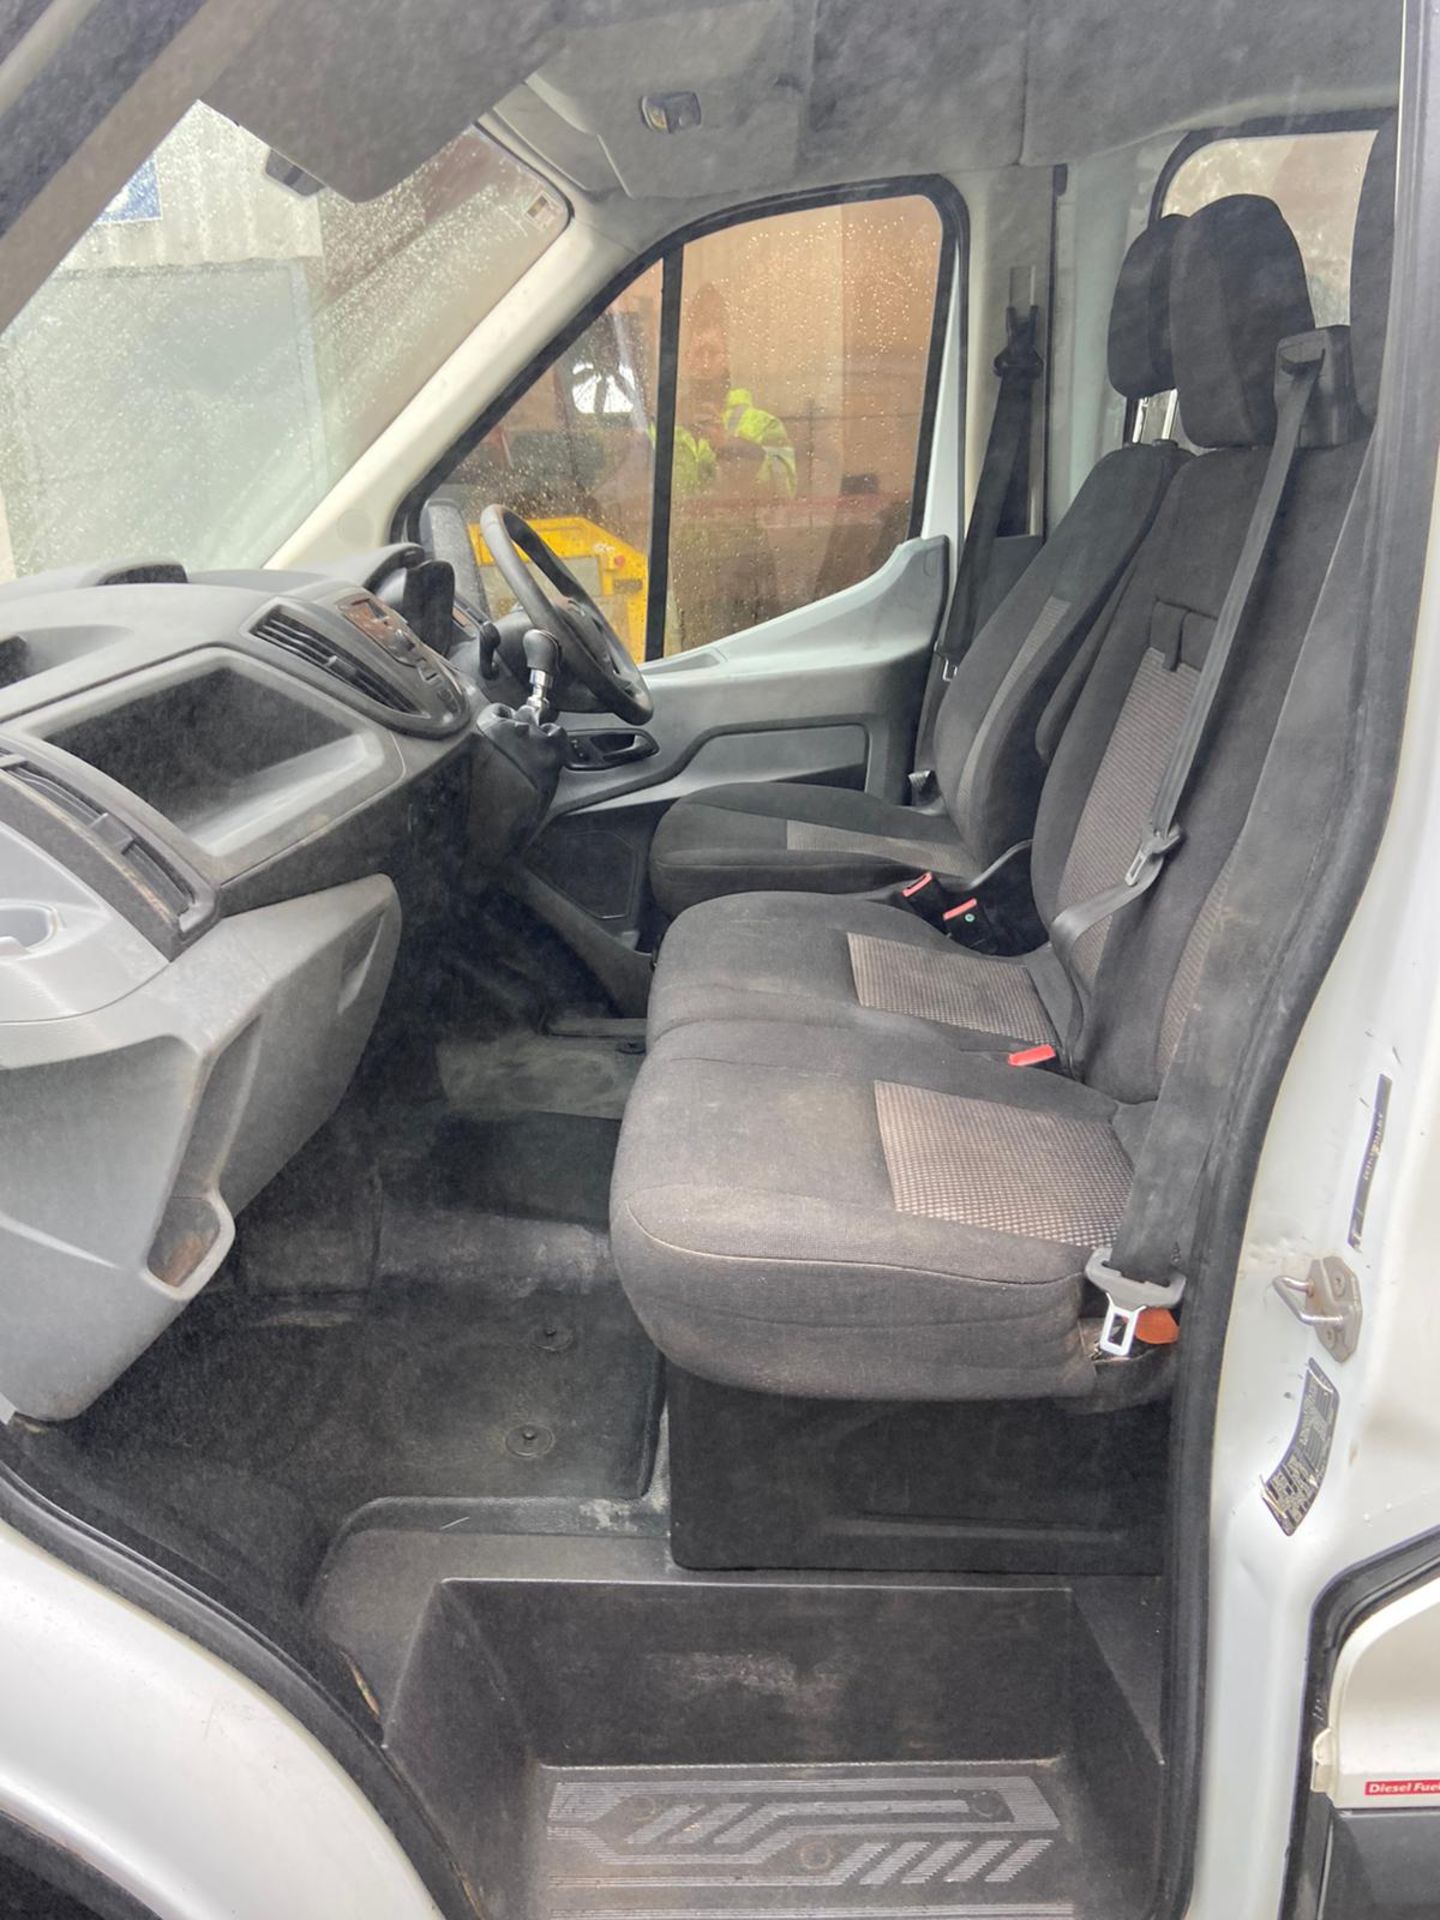 2016/16 REG FORD TRANSIT 350 ECONETIC TECH 2.2 DIESEL 7 SEATER PANEL VAN, SHOWING 0 FORMER KEEPERS - Image 8 of 11